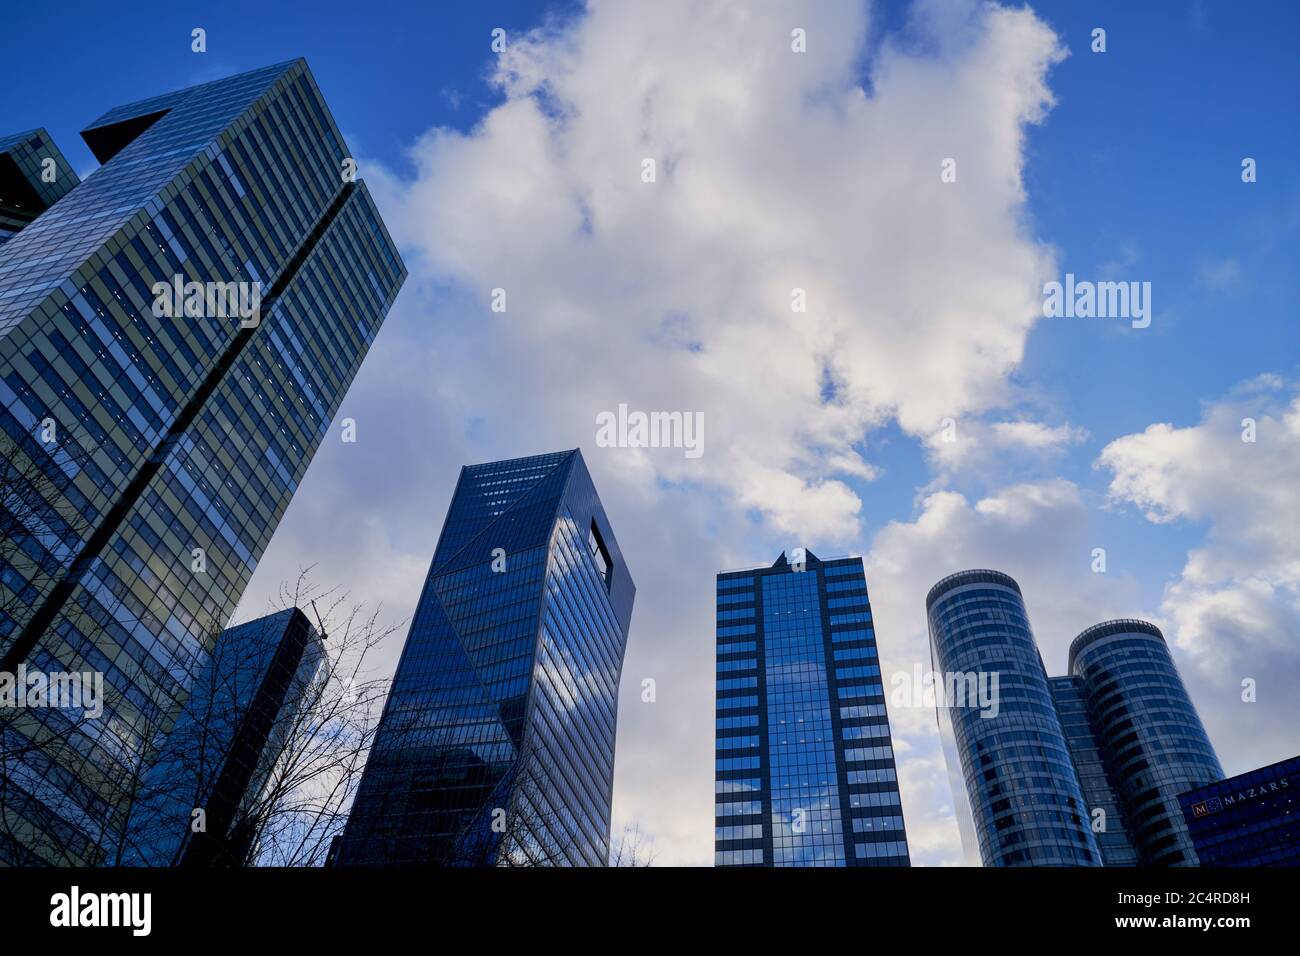 KPMG headquarters, skyscrapers and office buildings in La Defense business district, Paris Stock Photo